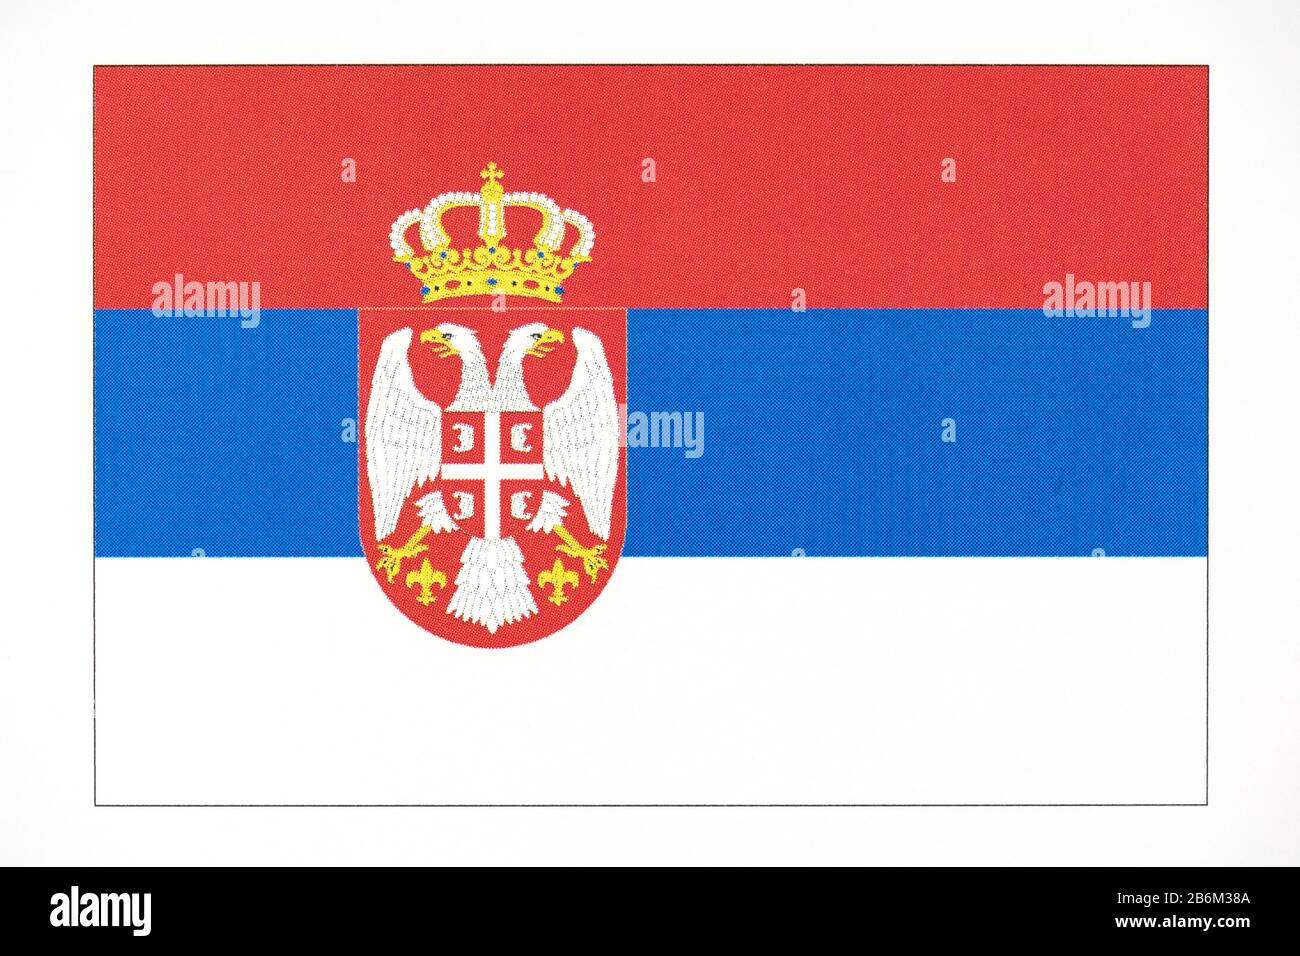 National flag of Serbia. Stock Photo